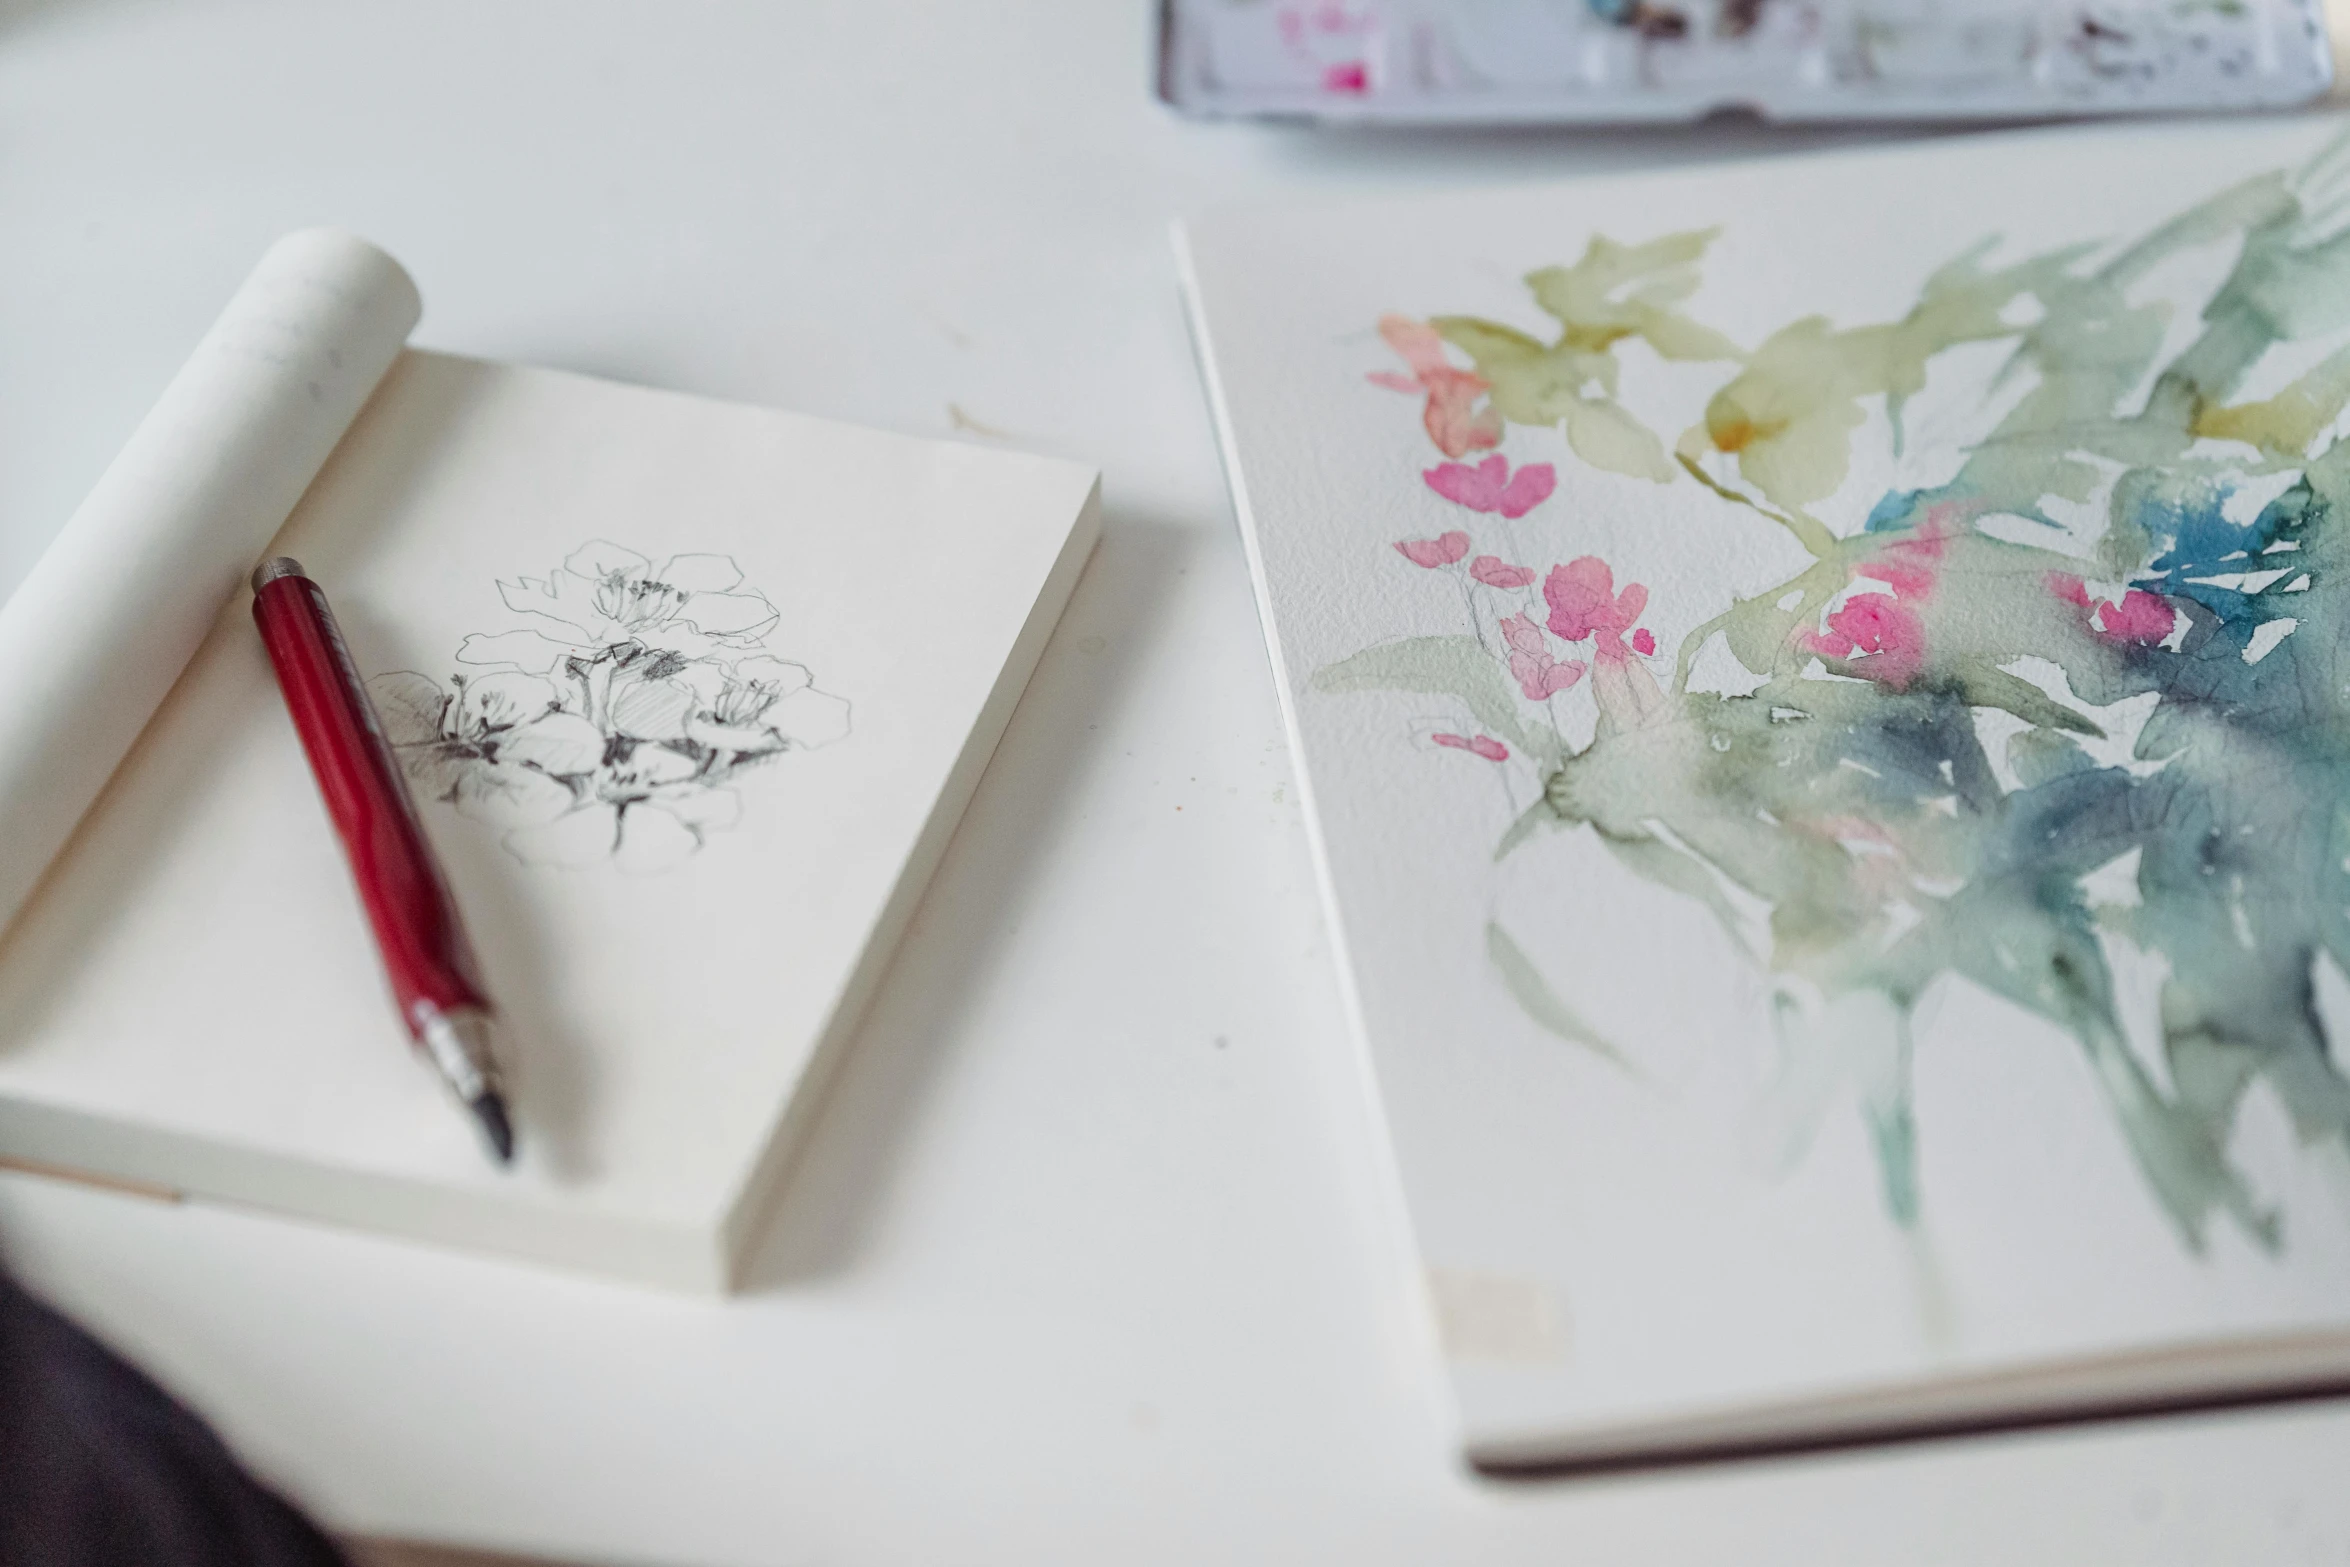 a white table topped with a notebook and a red pen, a watercolor painting, inspired by artist, trending on pexels, study of a flower fairy, delicate embellishments, painting on a canvas, style of beatrix potter